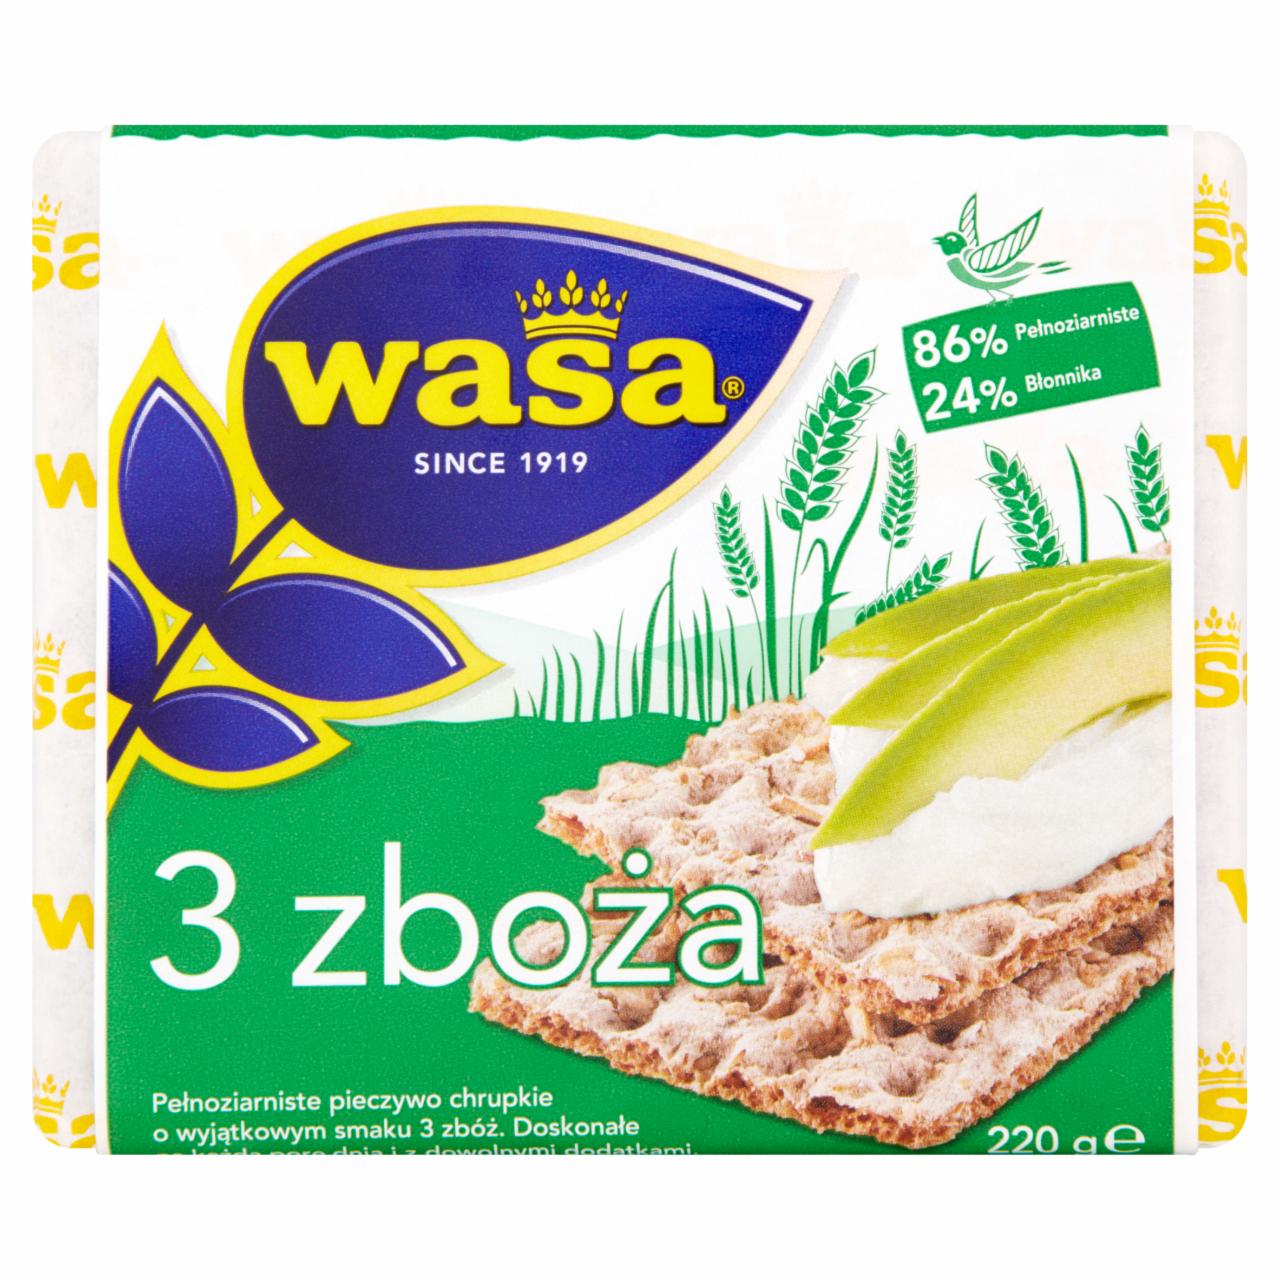 Photo - Wasa 3 zboża Wholemeal Rye Flour Bread with Wheat Brans and Oat Flakes 220 g